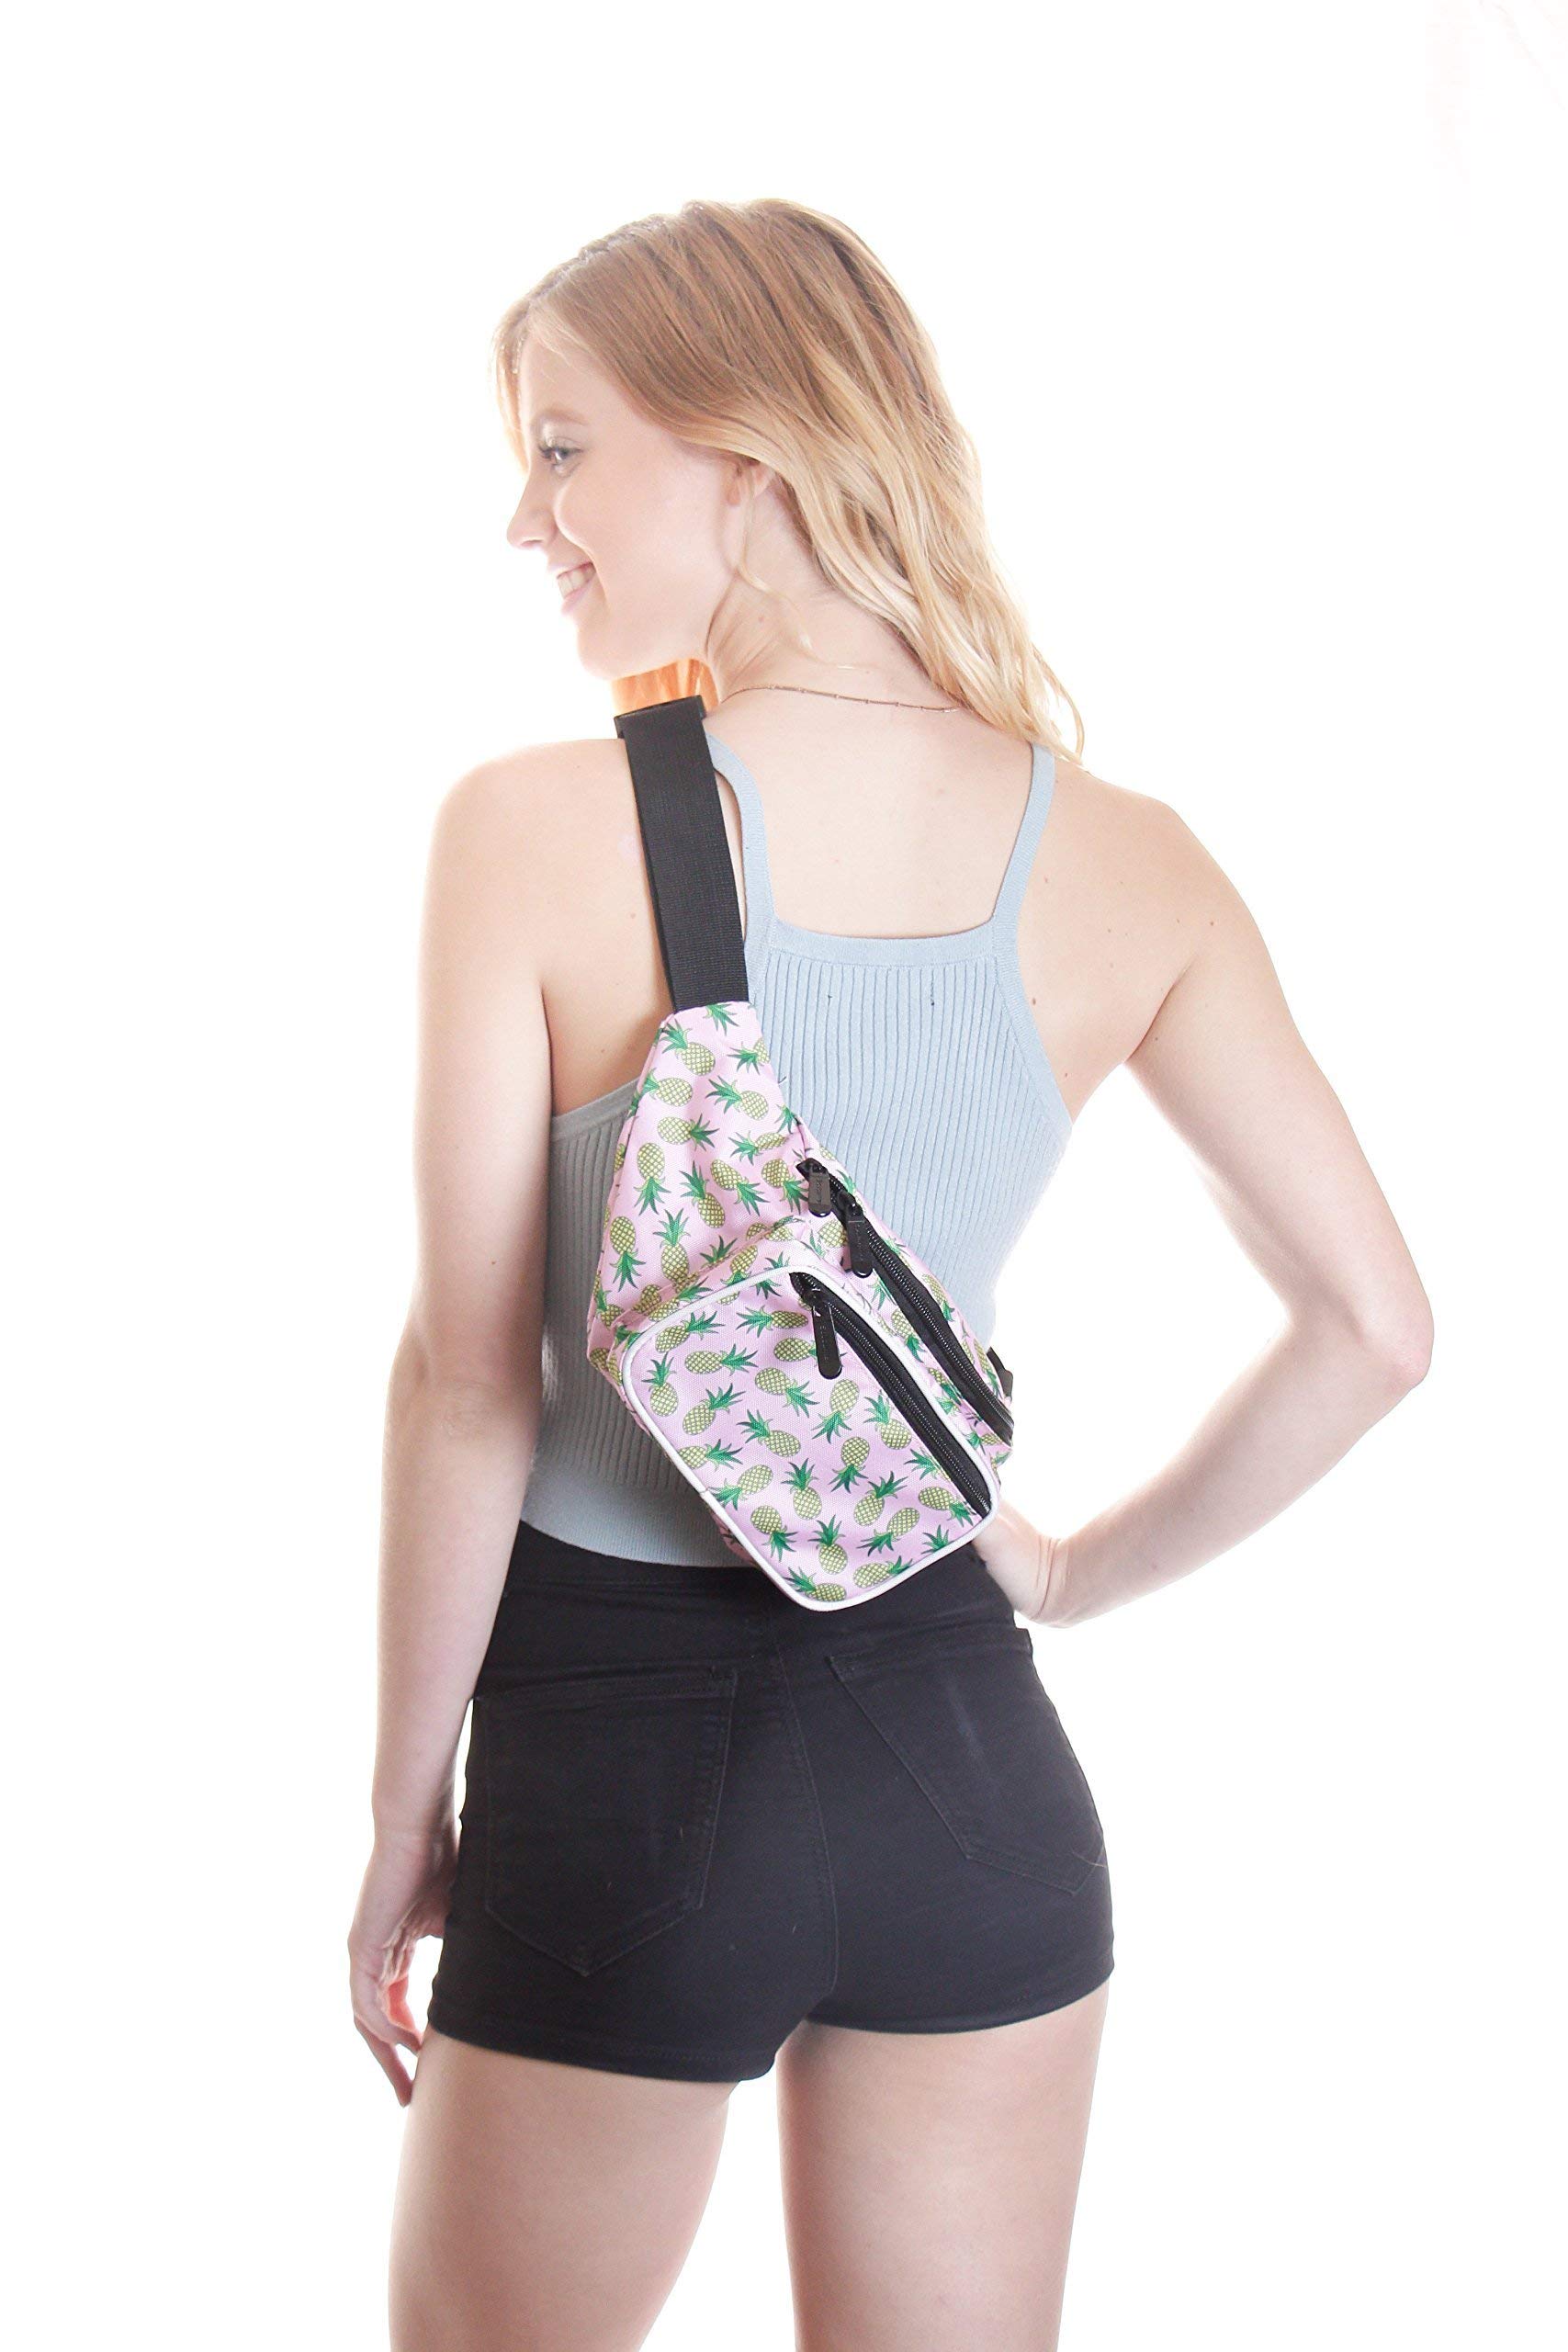 Holographic Silver Rave Fanny Pack and Pineapple Fanny Pack Bundle